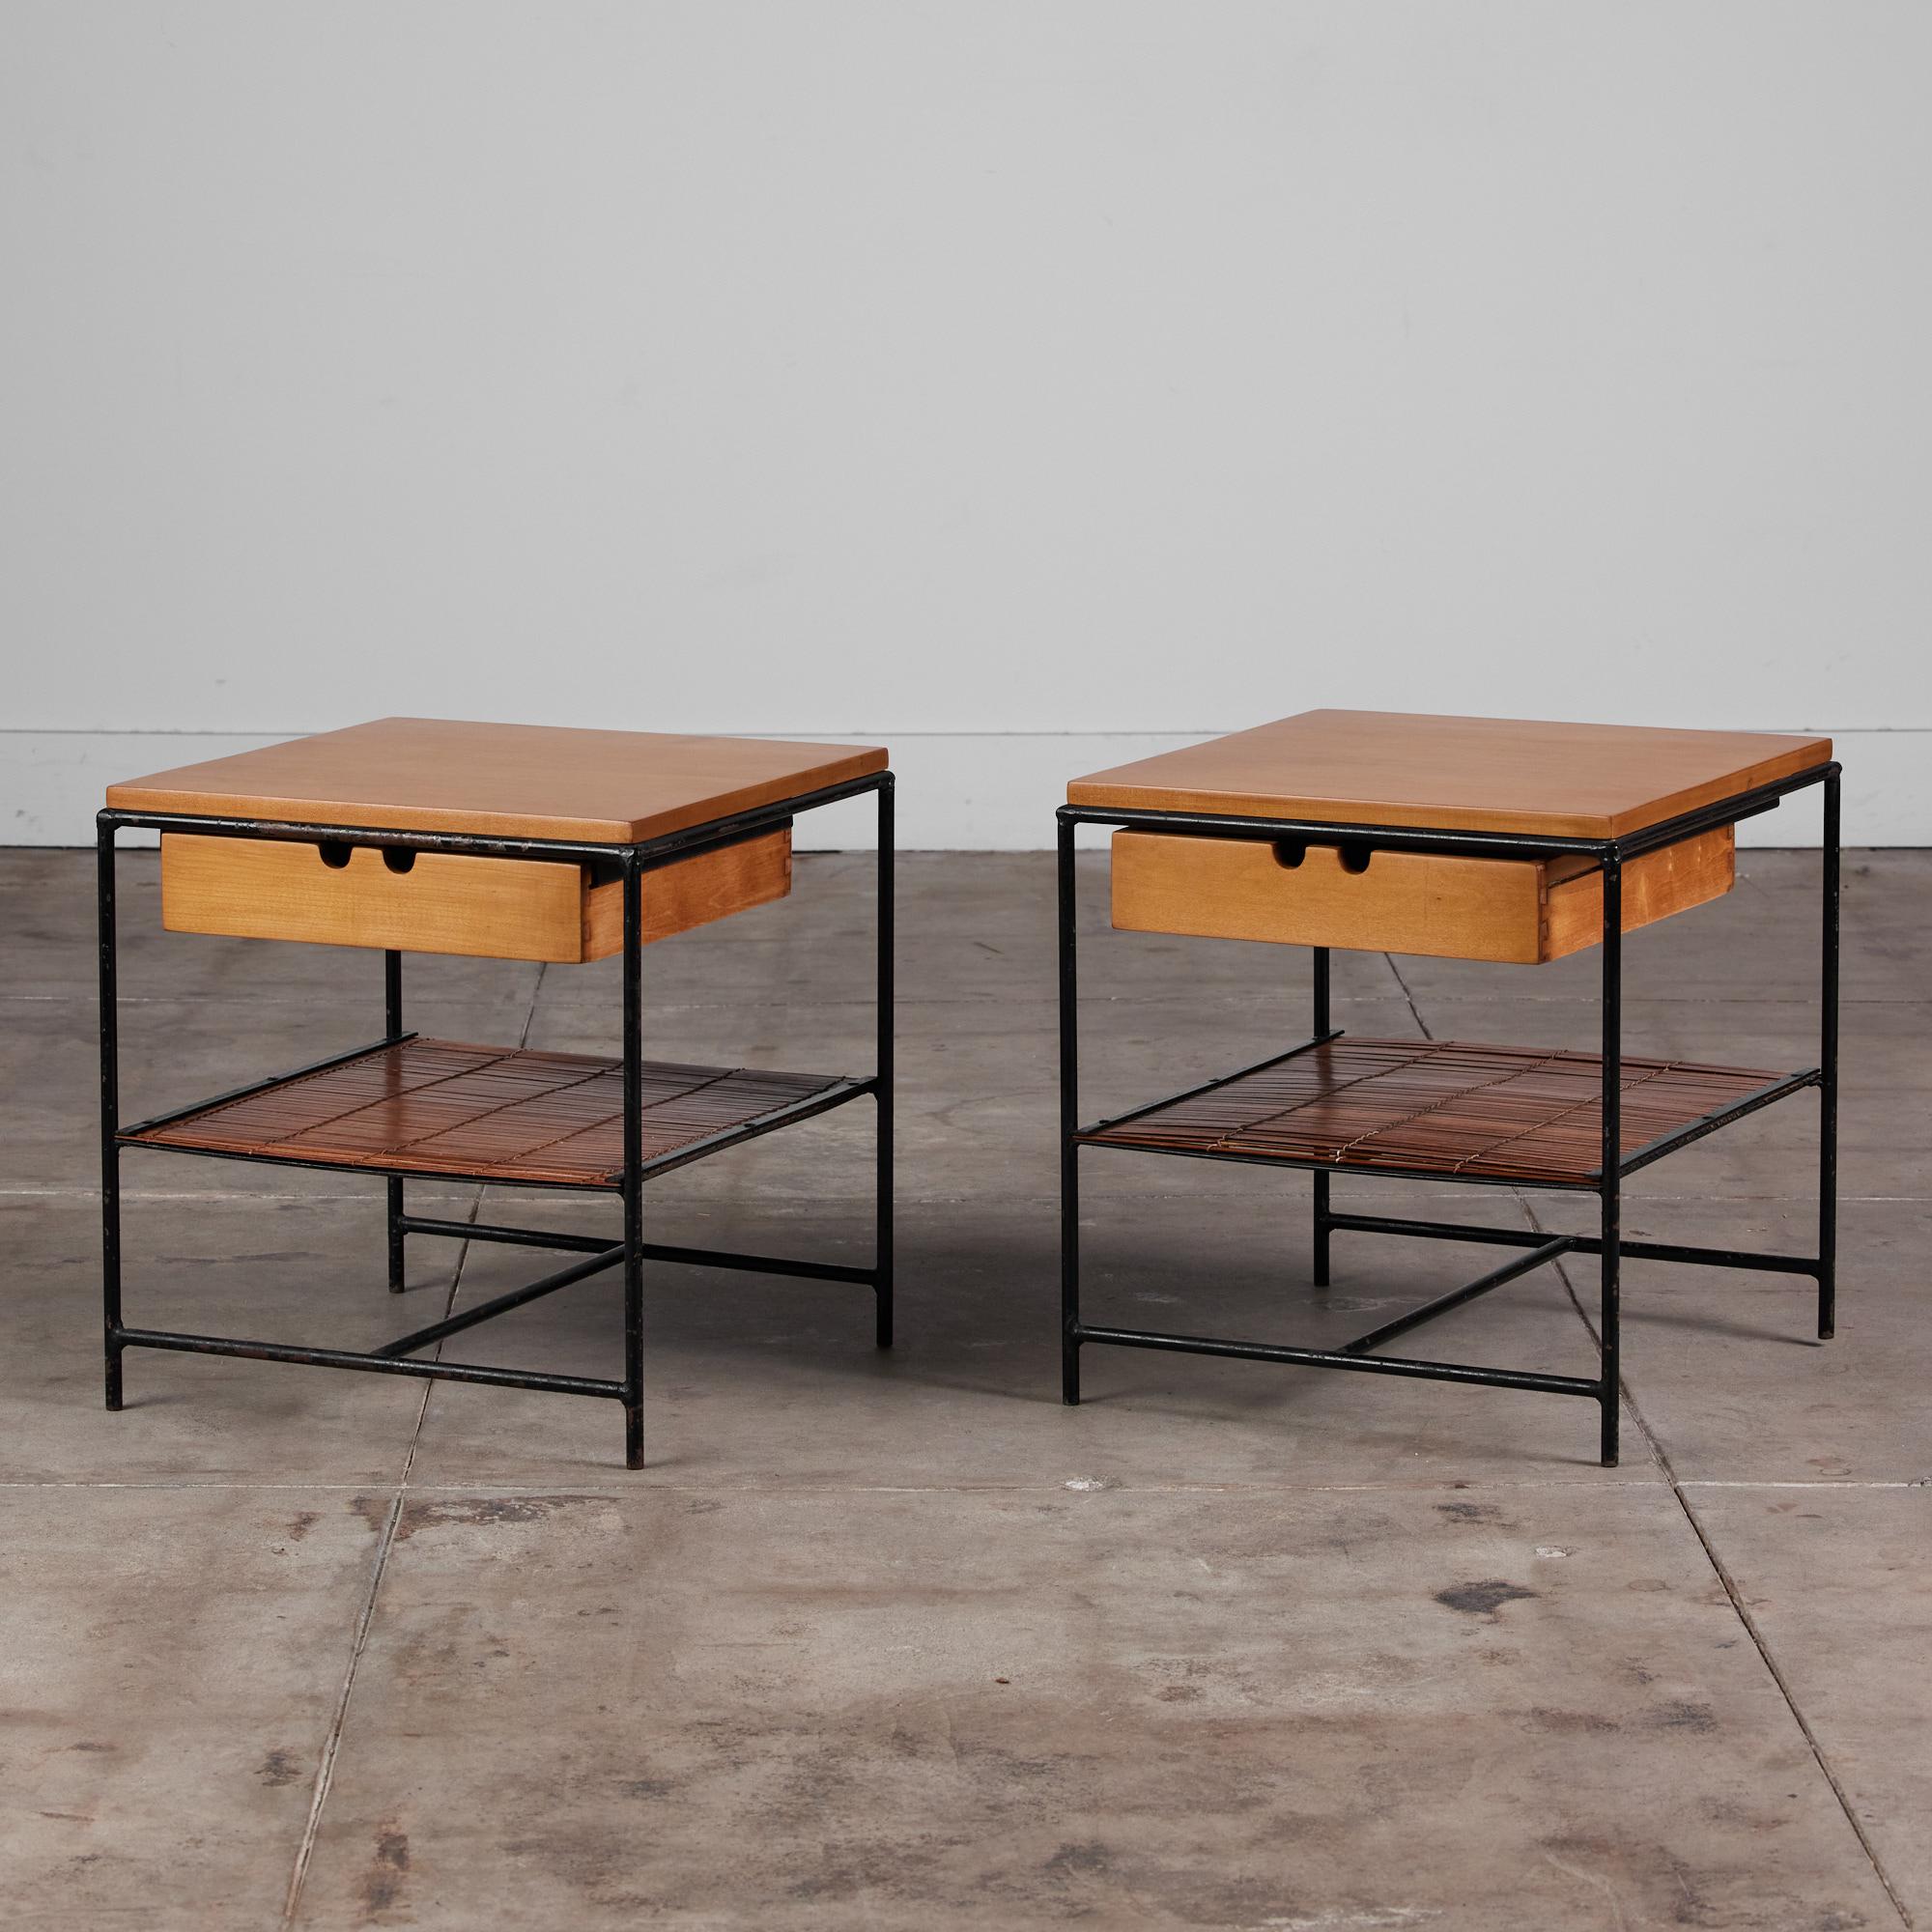 A pair of highly desirable and rare Paul McCobb nightstands from his Planner Group collection for Winchedon, c.1950s. The pair features an exposed wrought iron frame, single maple drawer and top, and lower shelf made from bamboo slats.

Dimensions: